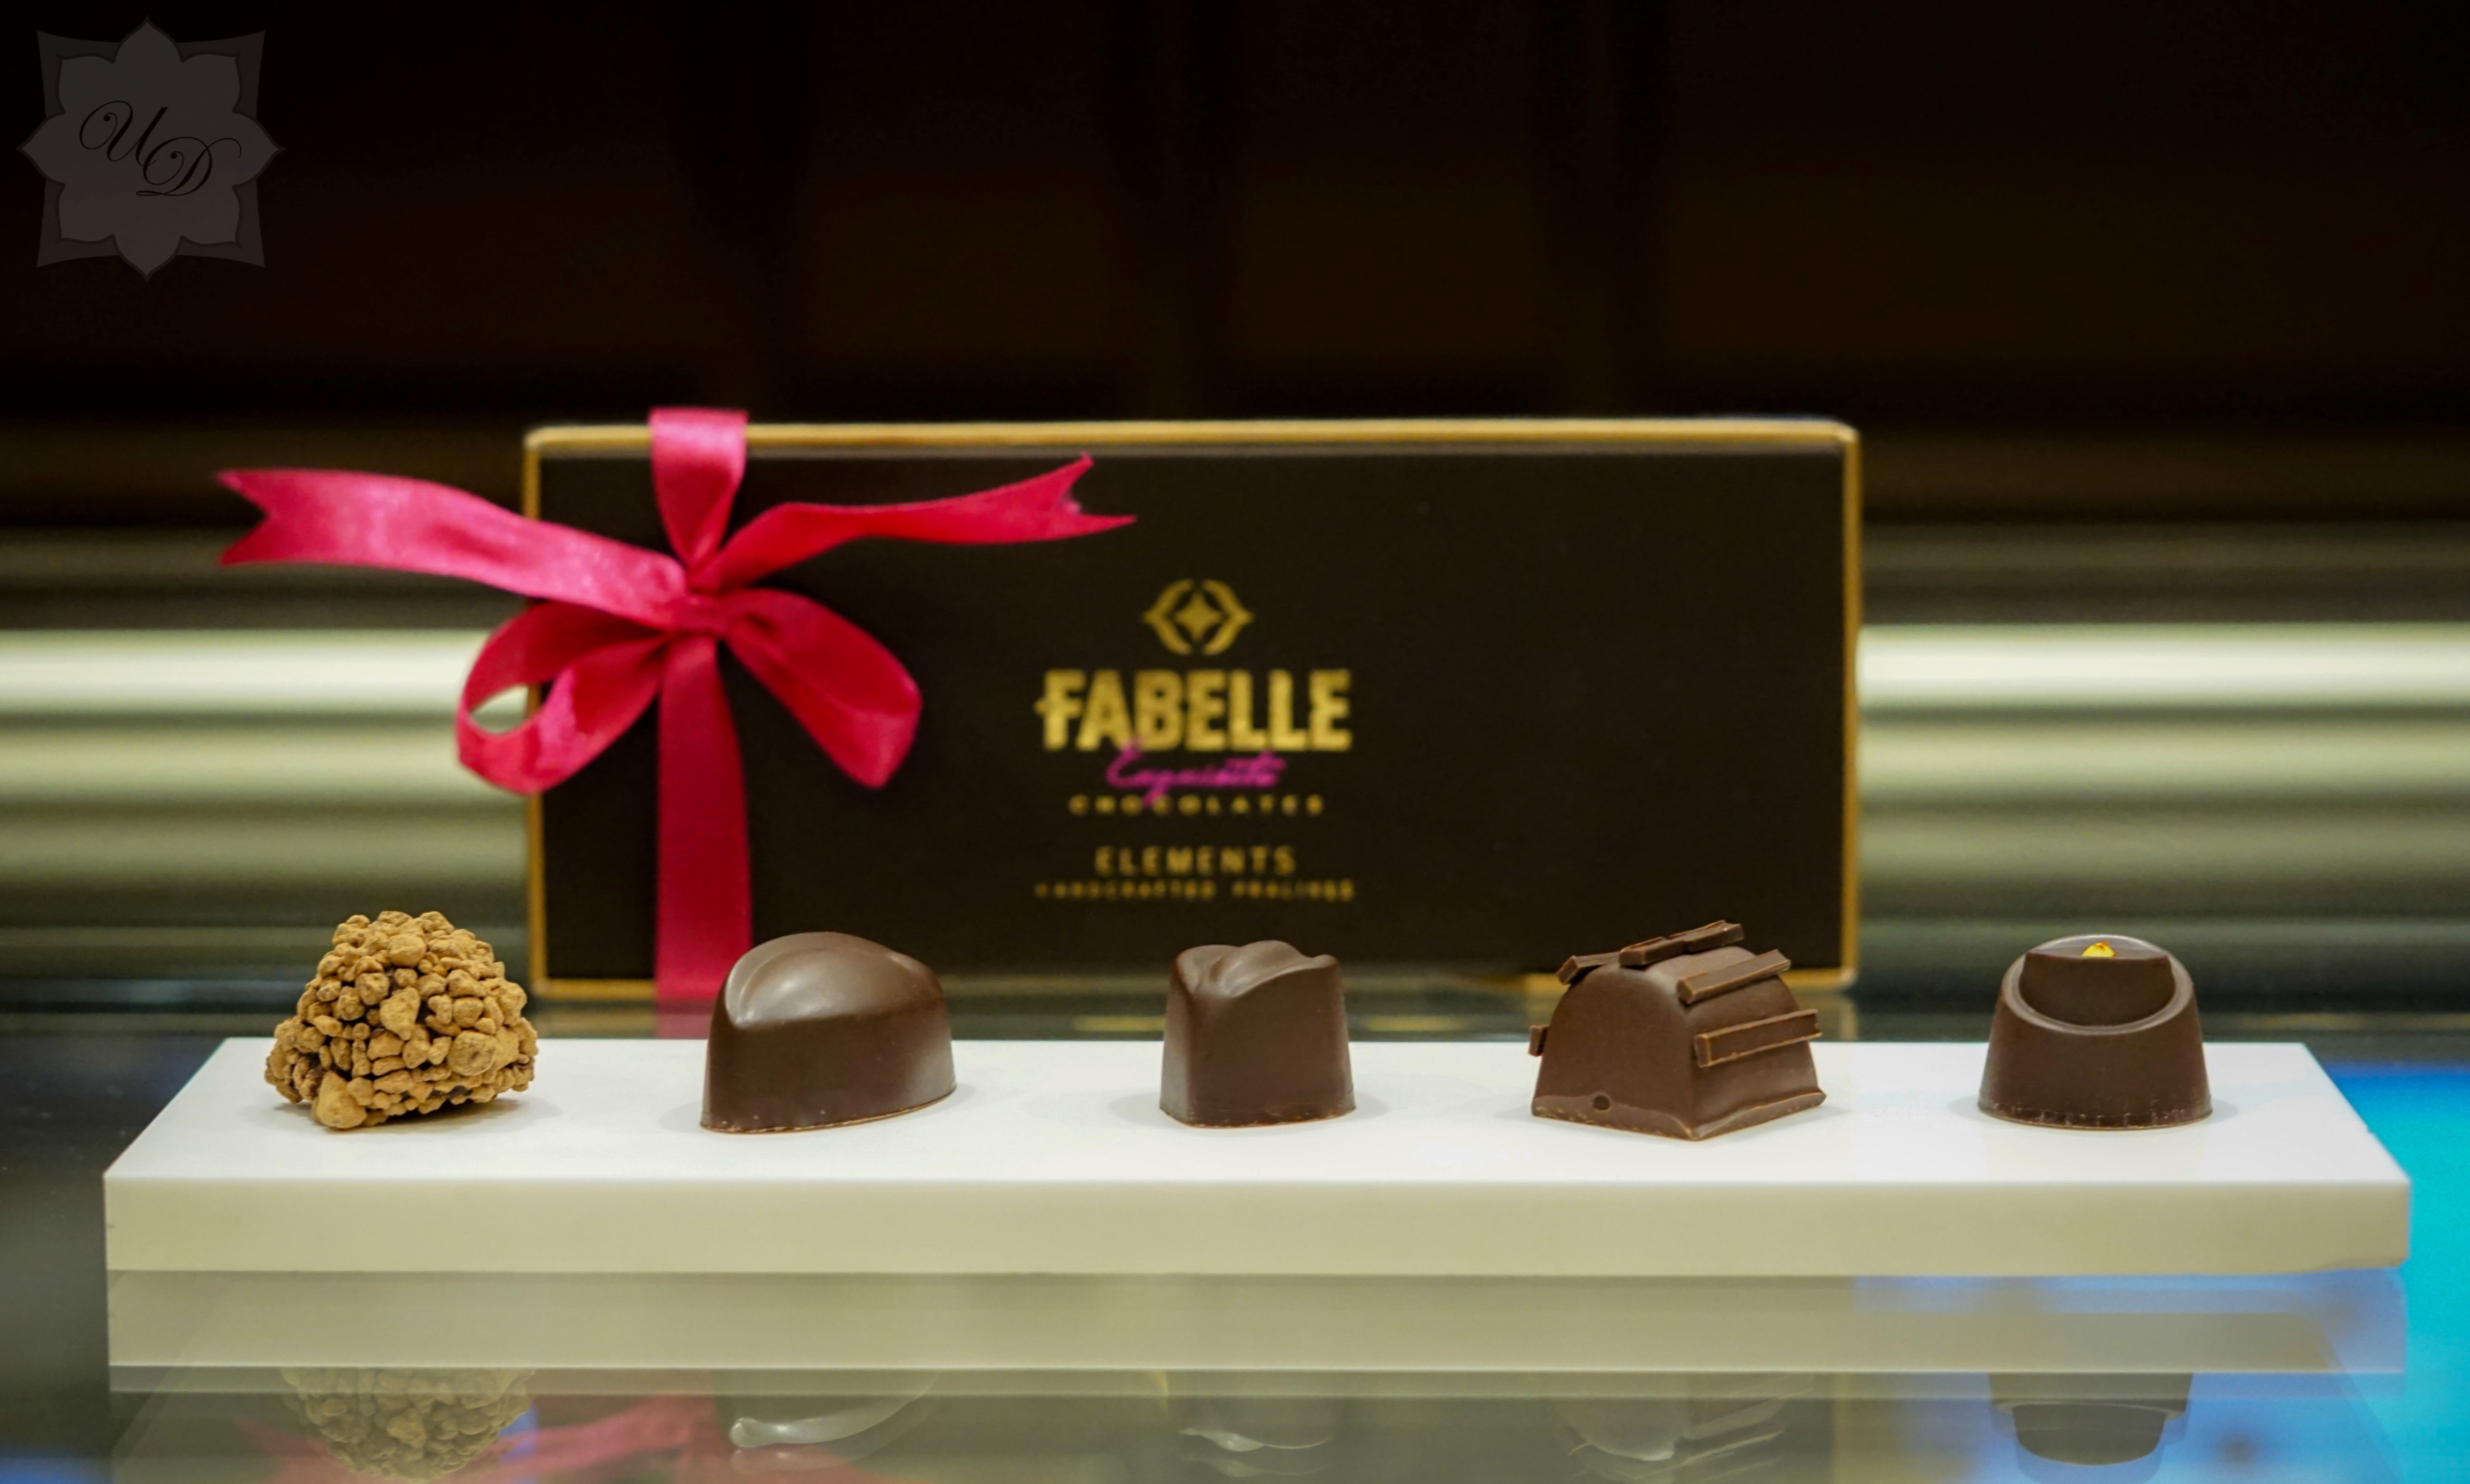 ITC's Fabelle launches luxury chocolate crafted with 24k edible gold